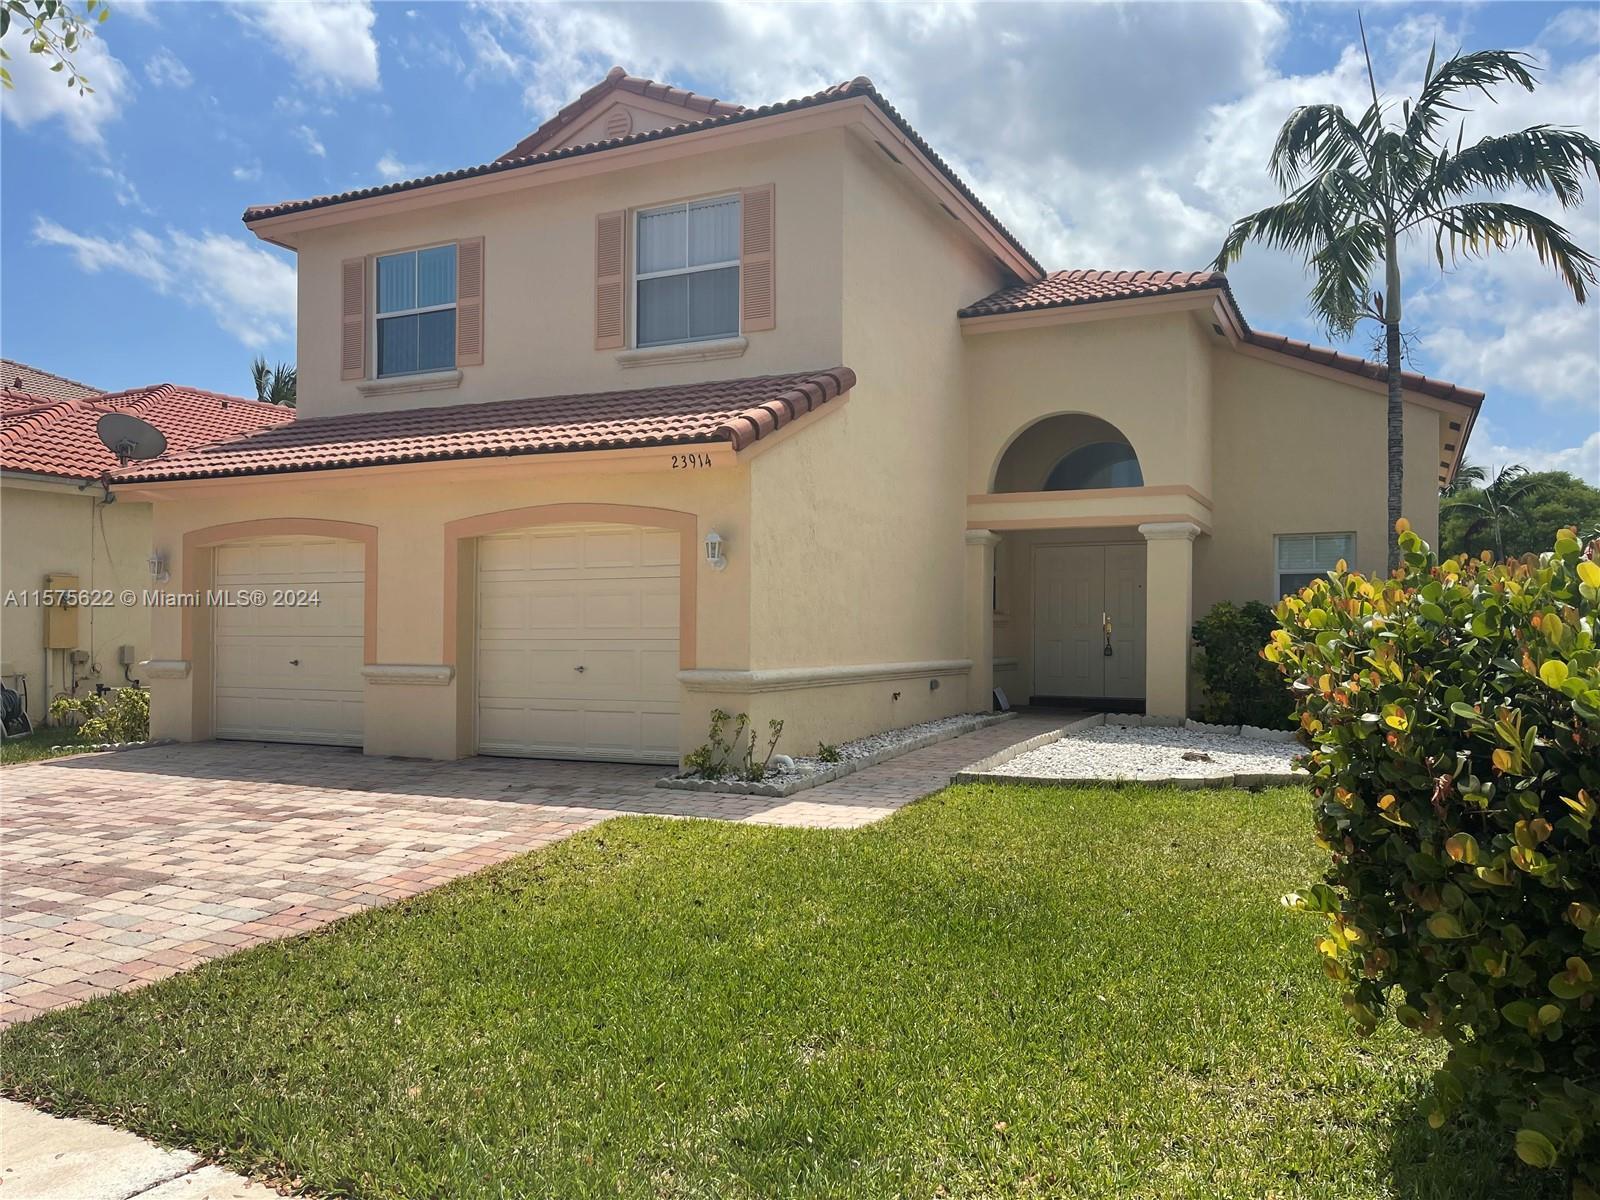 Photo of 23914 SW 108th Ct in Homestead, FL